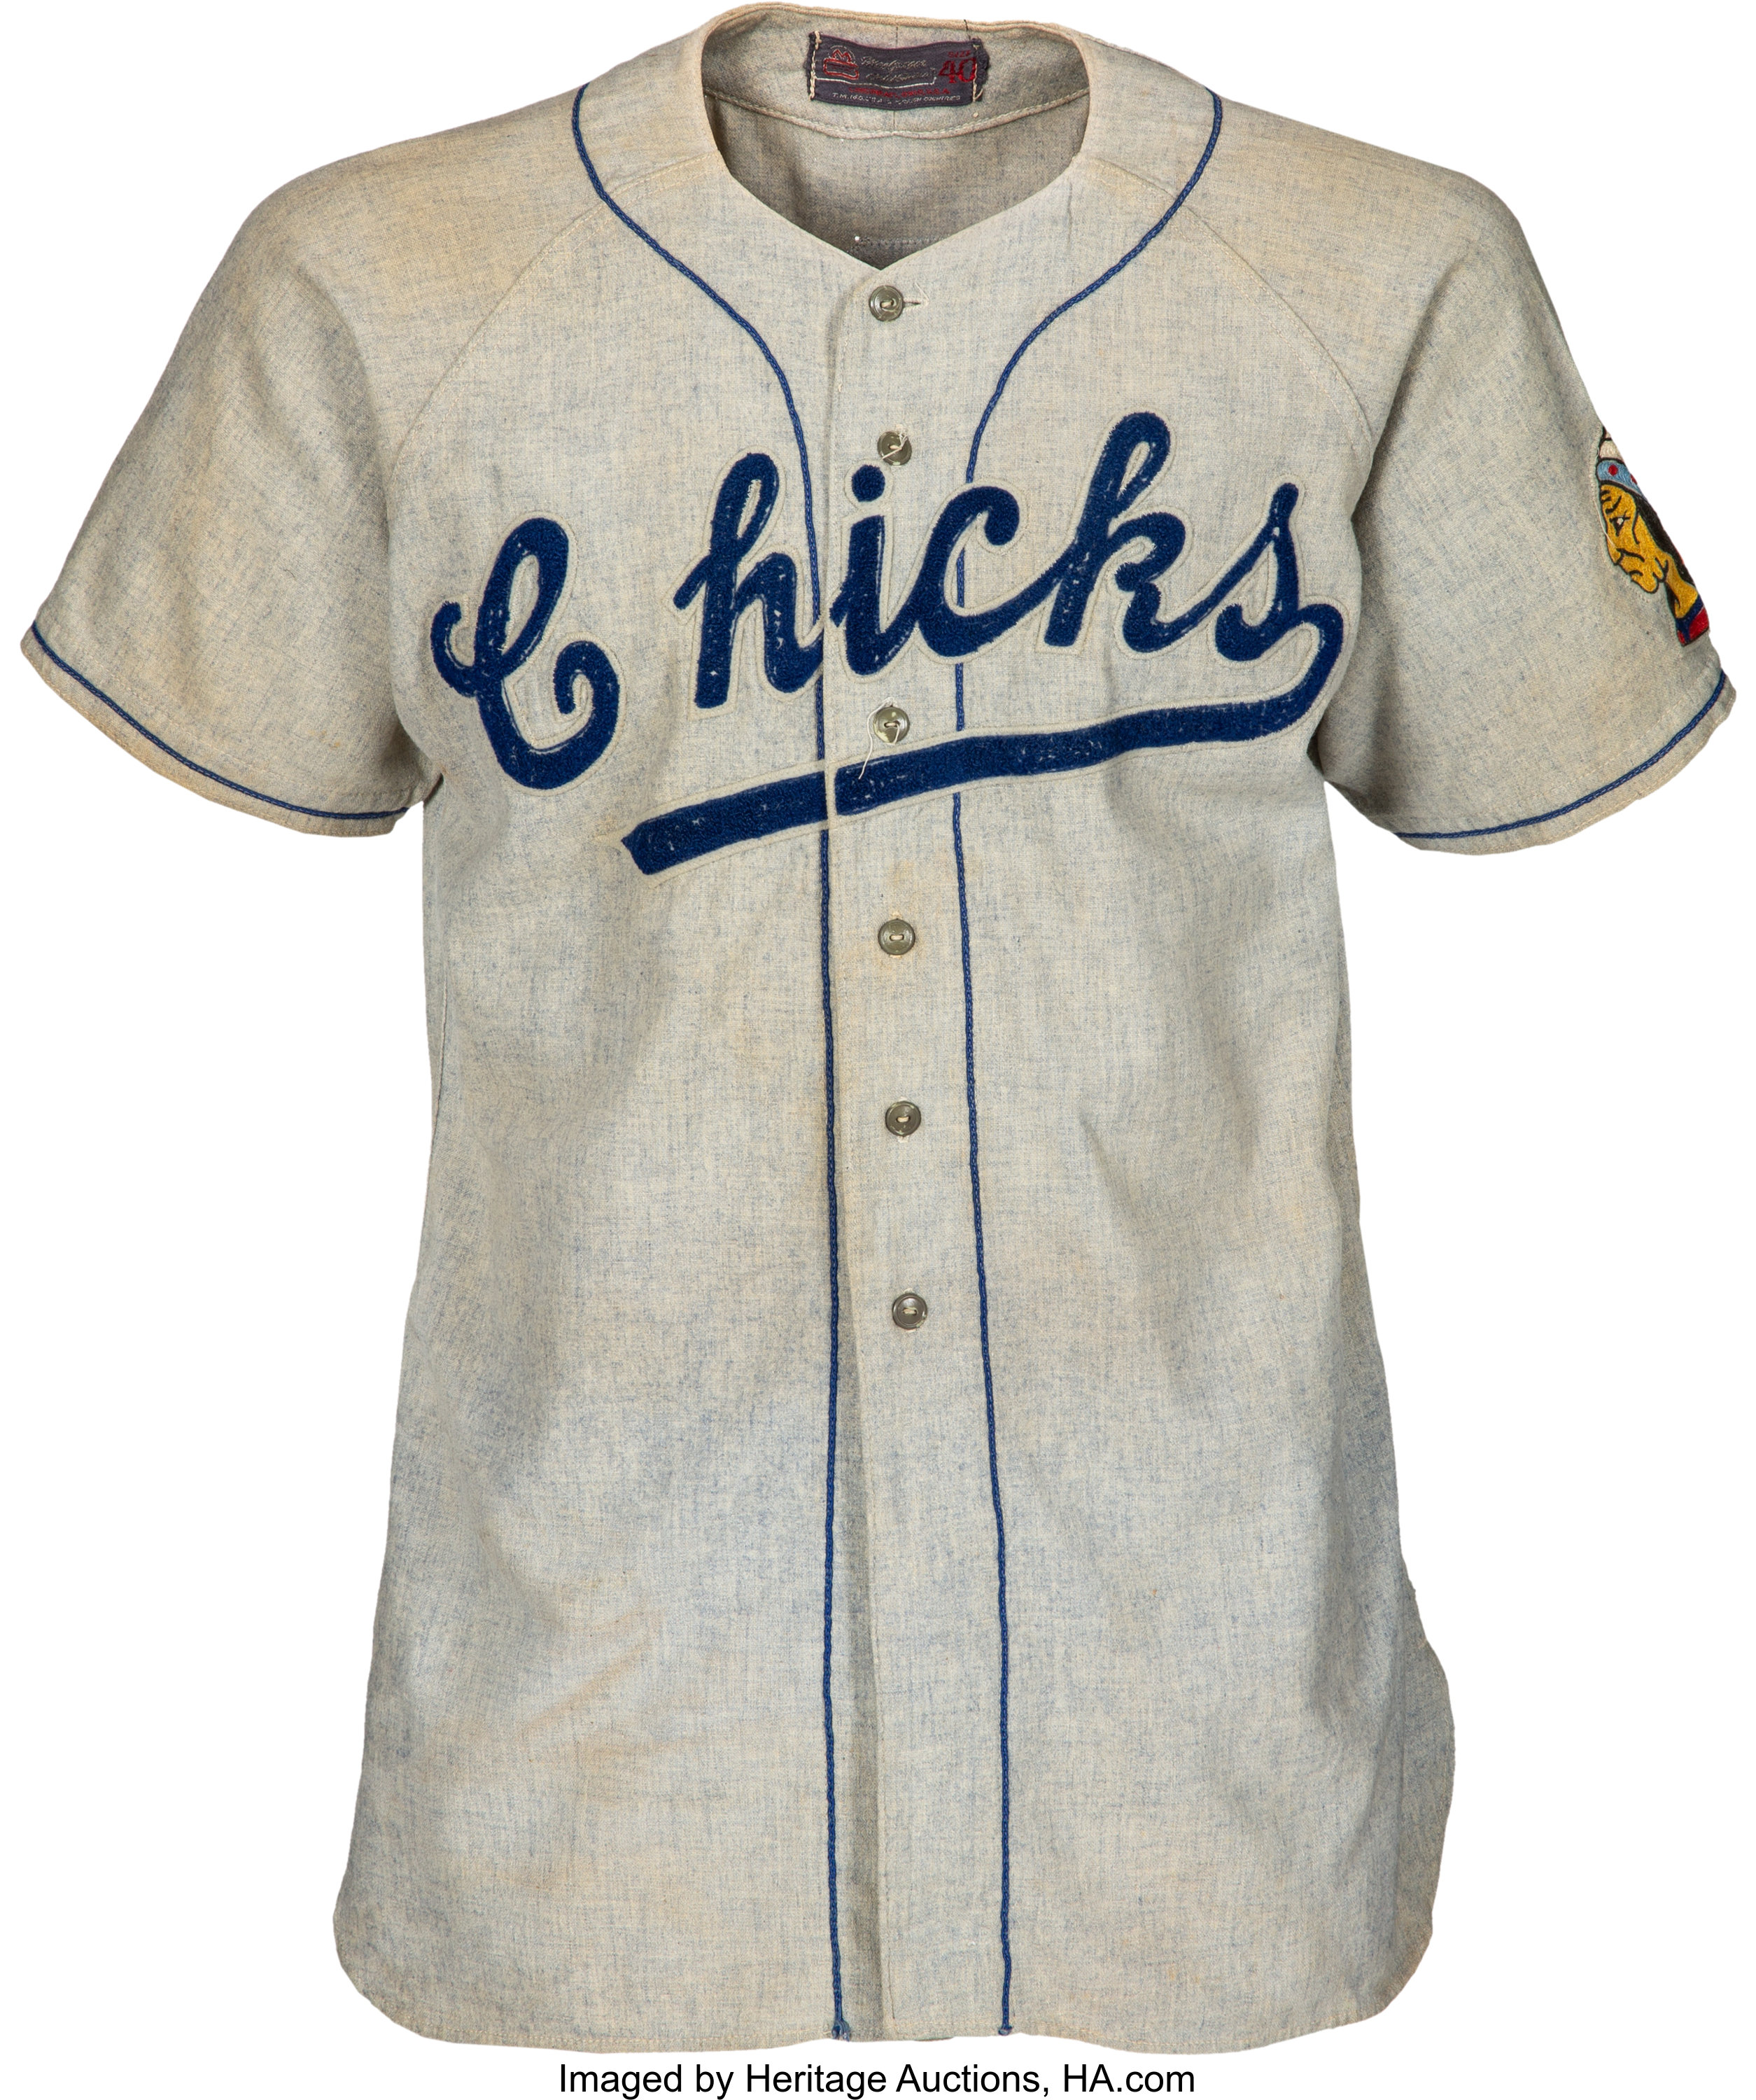 1949 Memphis Chickasaws Game Worn Jersey Attributed to Luke Appling, Lot  #53442